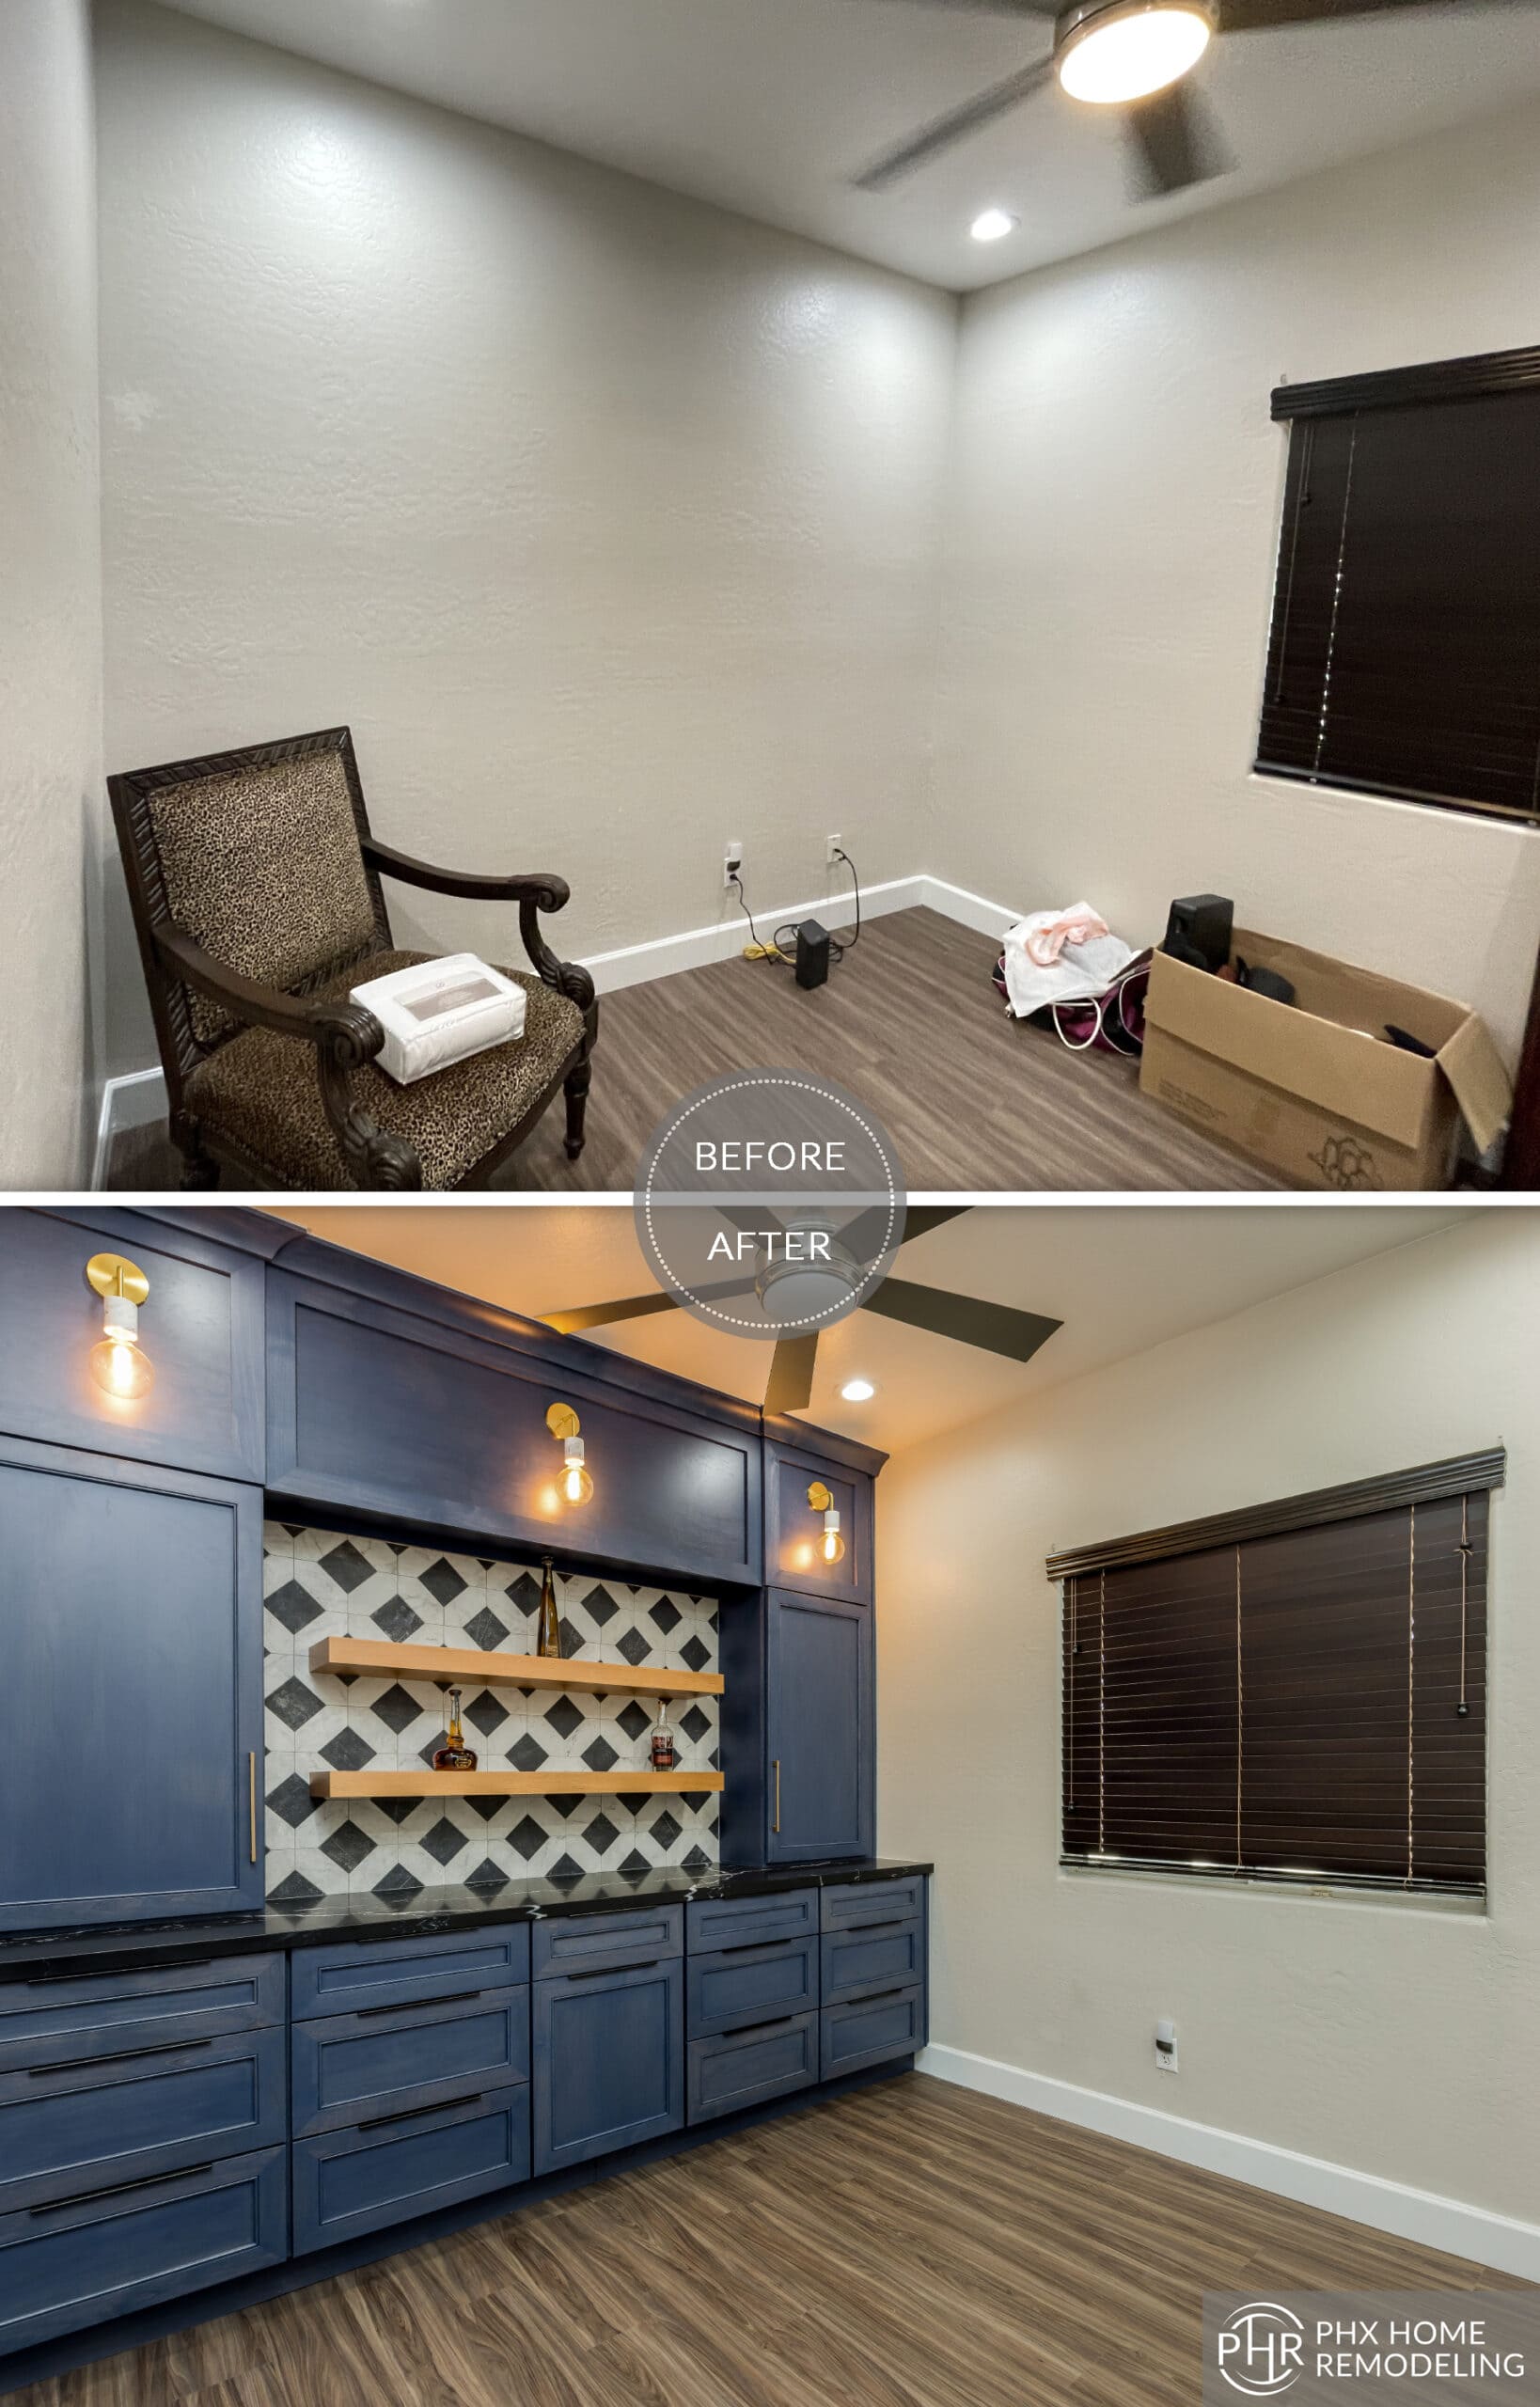 Before And After - General Contractor Services For Your Entertainment Wall Remodel